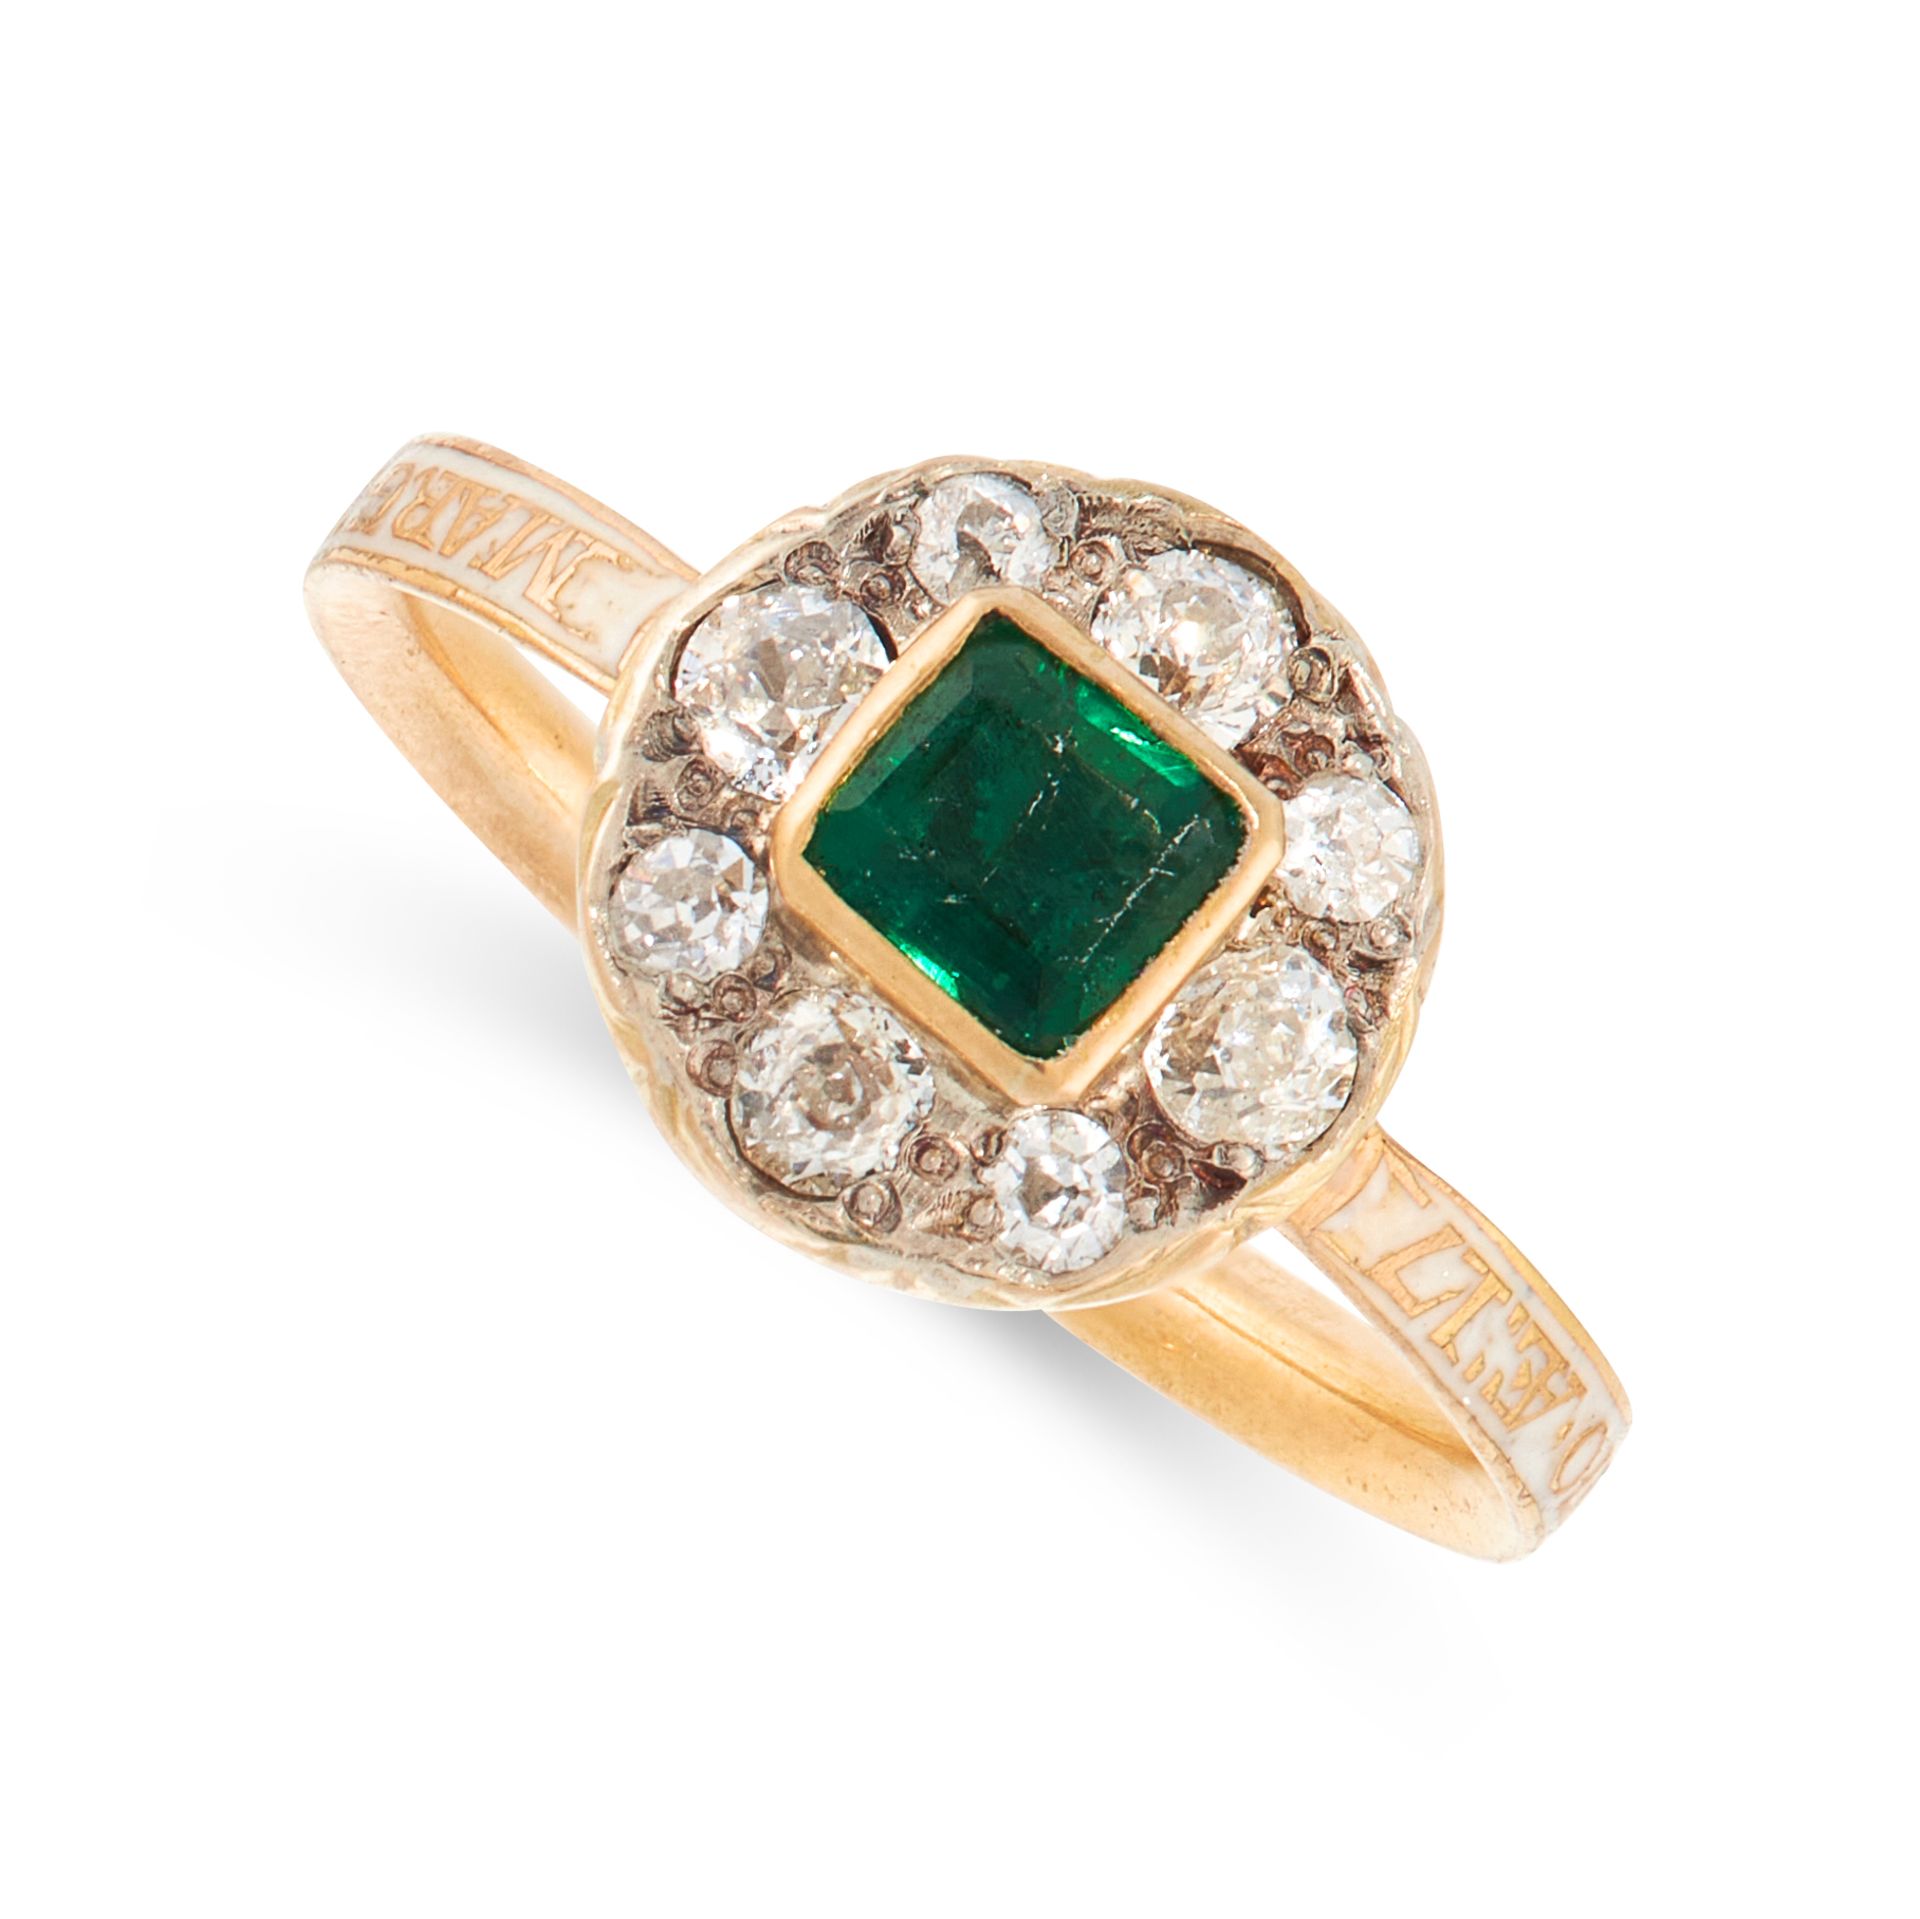 AN ANTIQUE EMERALD, DIAMOND AND ENAMEL MOURNING RING, CIRCA 1770 in high carat yellow gold, set with